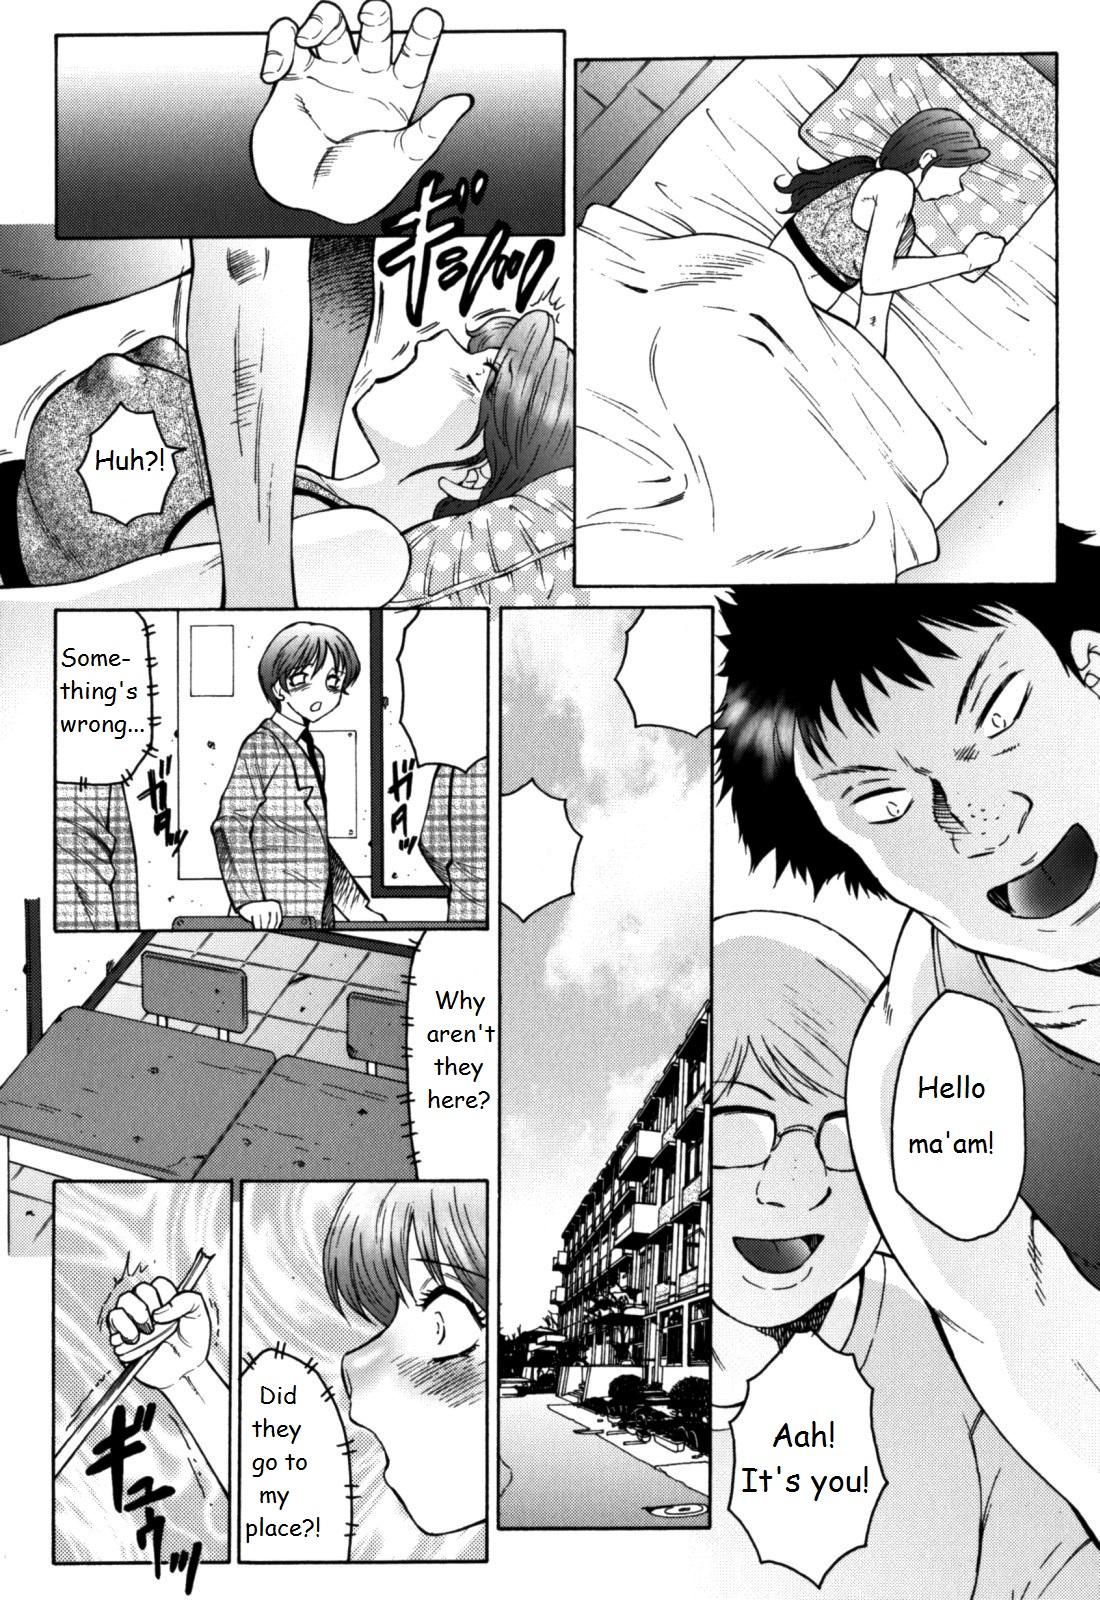 Anale Haha Mamire Ch. 4 Tanned - Page 4